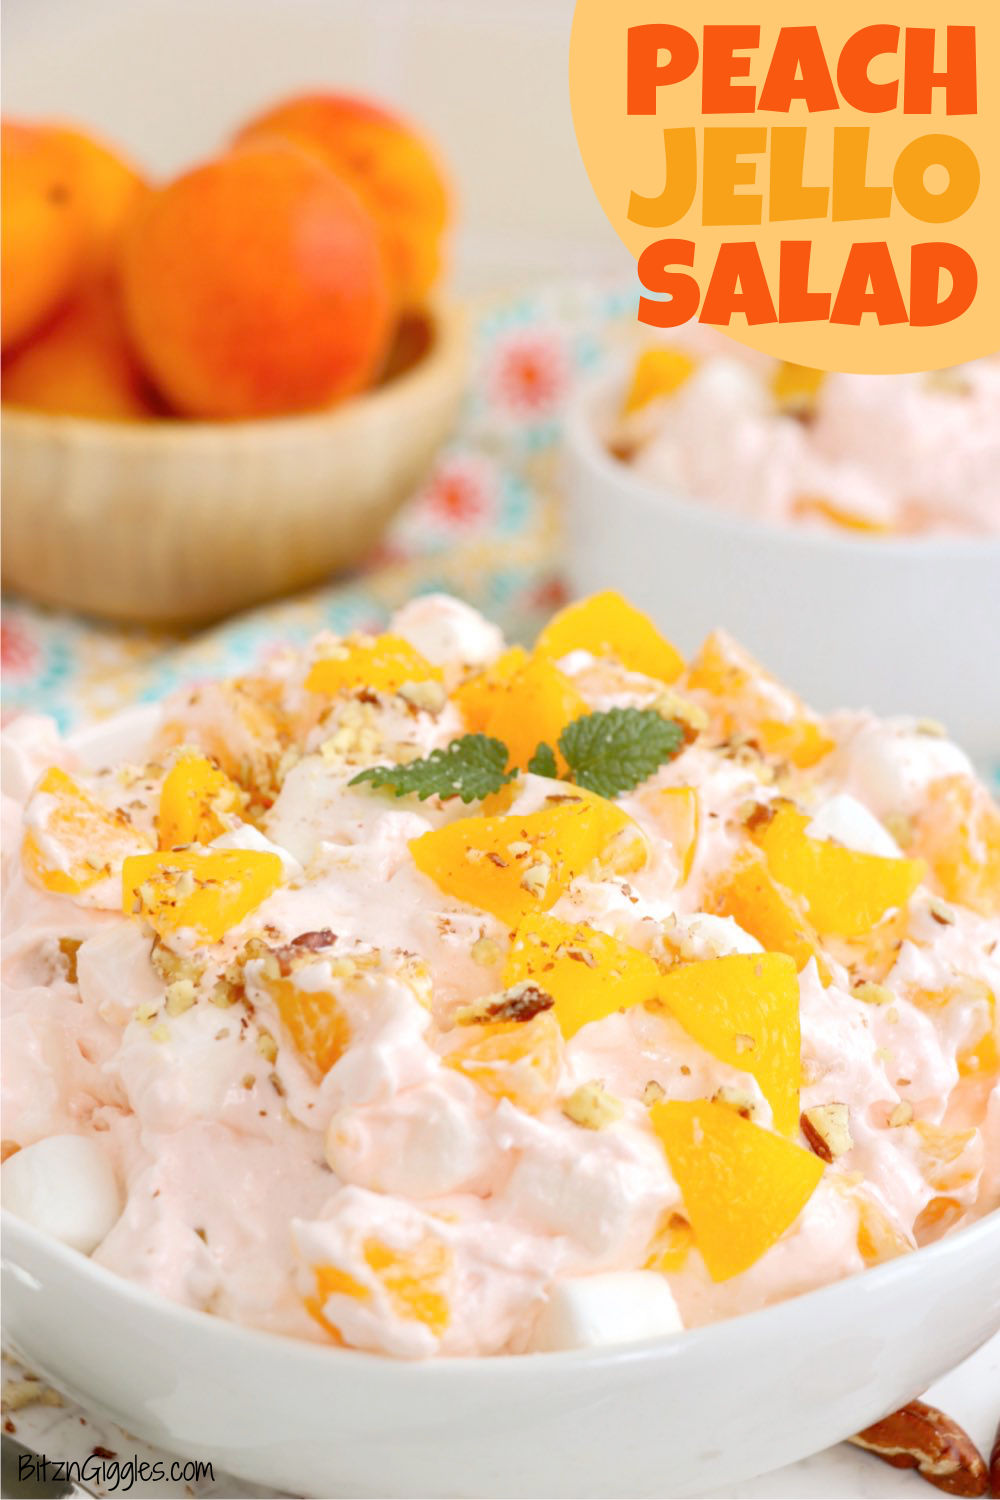 Bowl of peach jello salad topped with canned peaches and a sprig of mint.